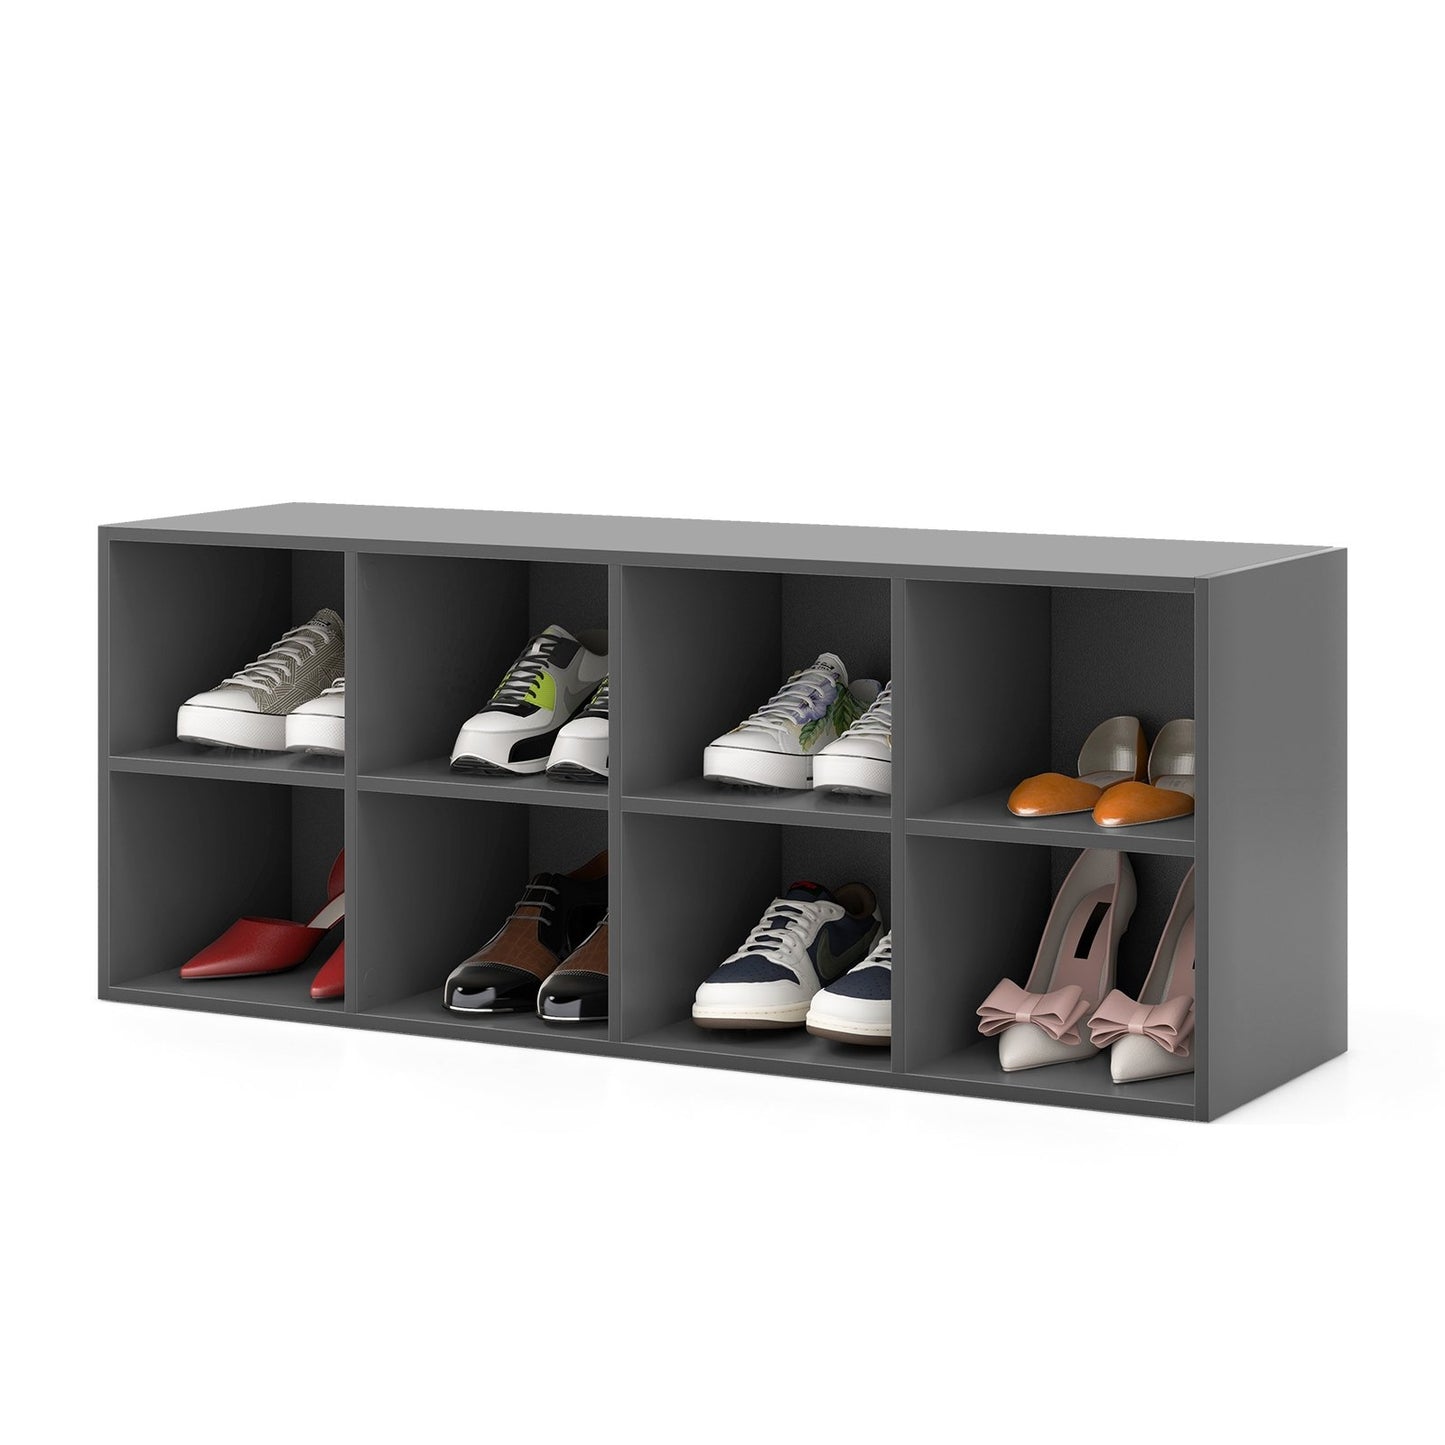 8 Cubbies Shoe Organizer with 500 LBS Weight Capacity, Gray